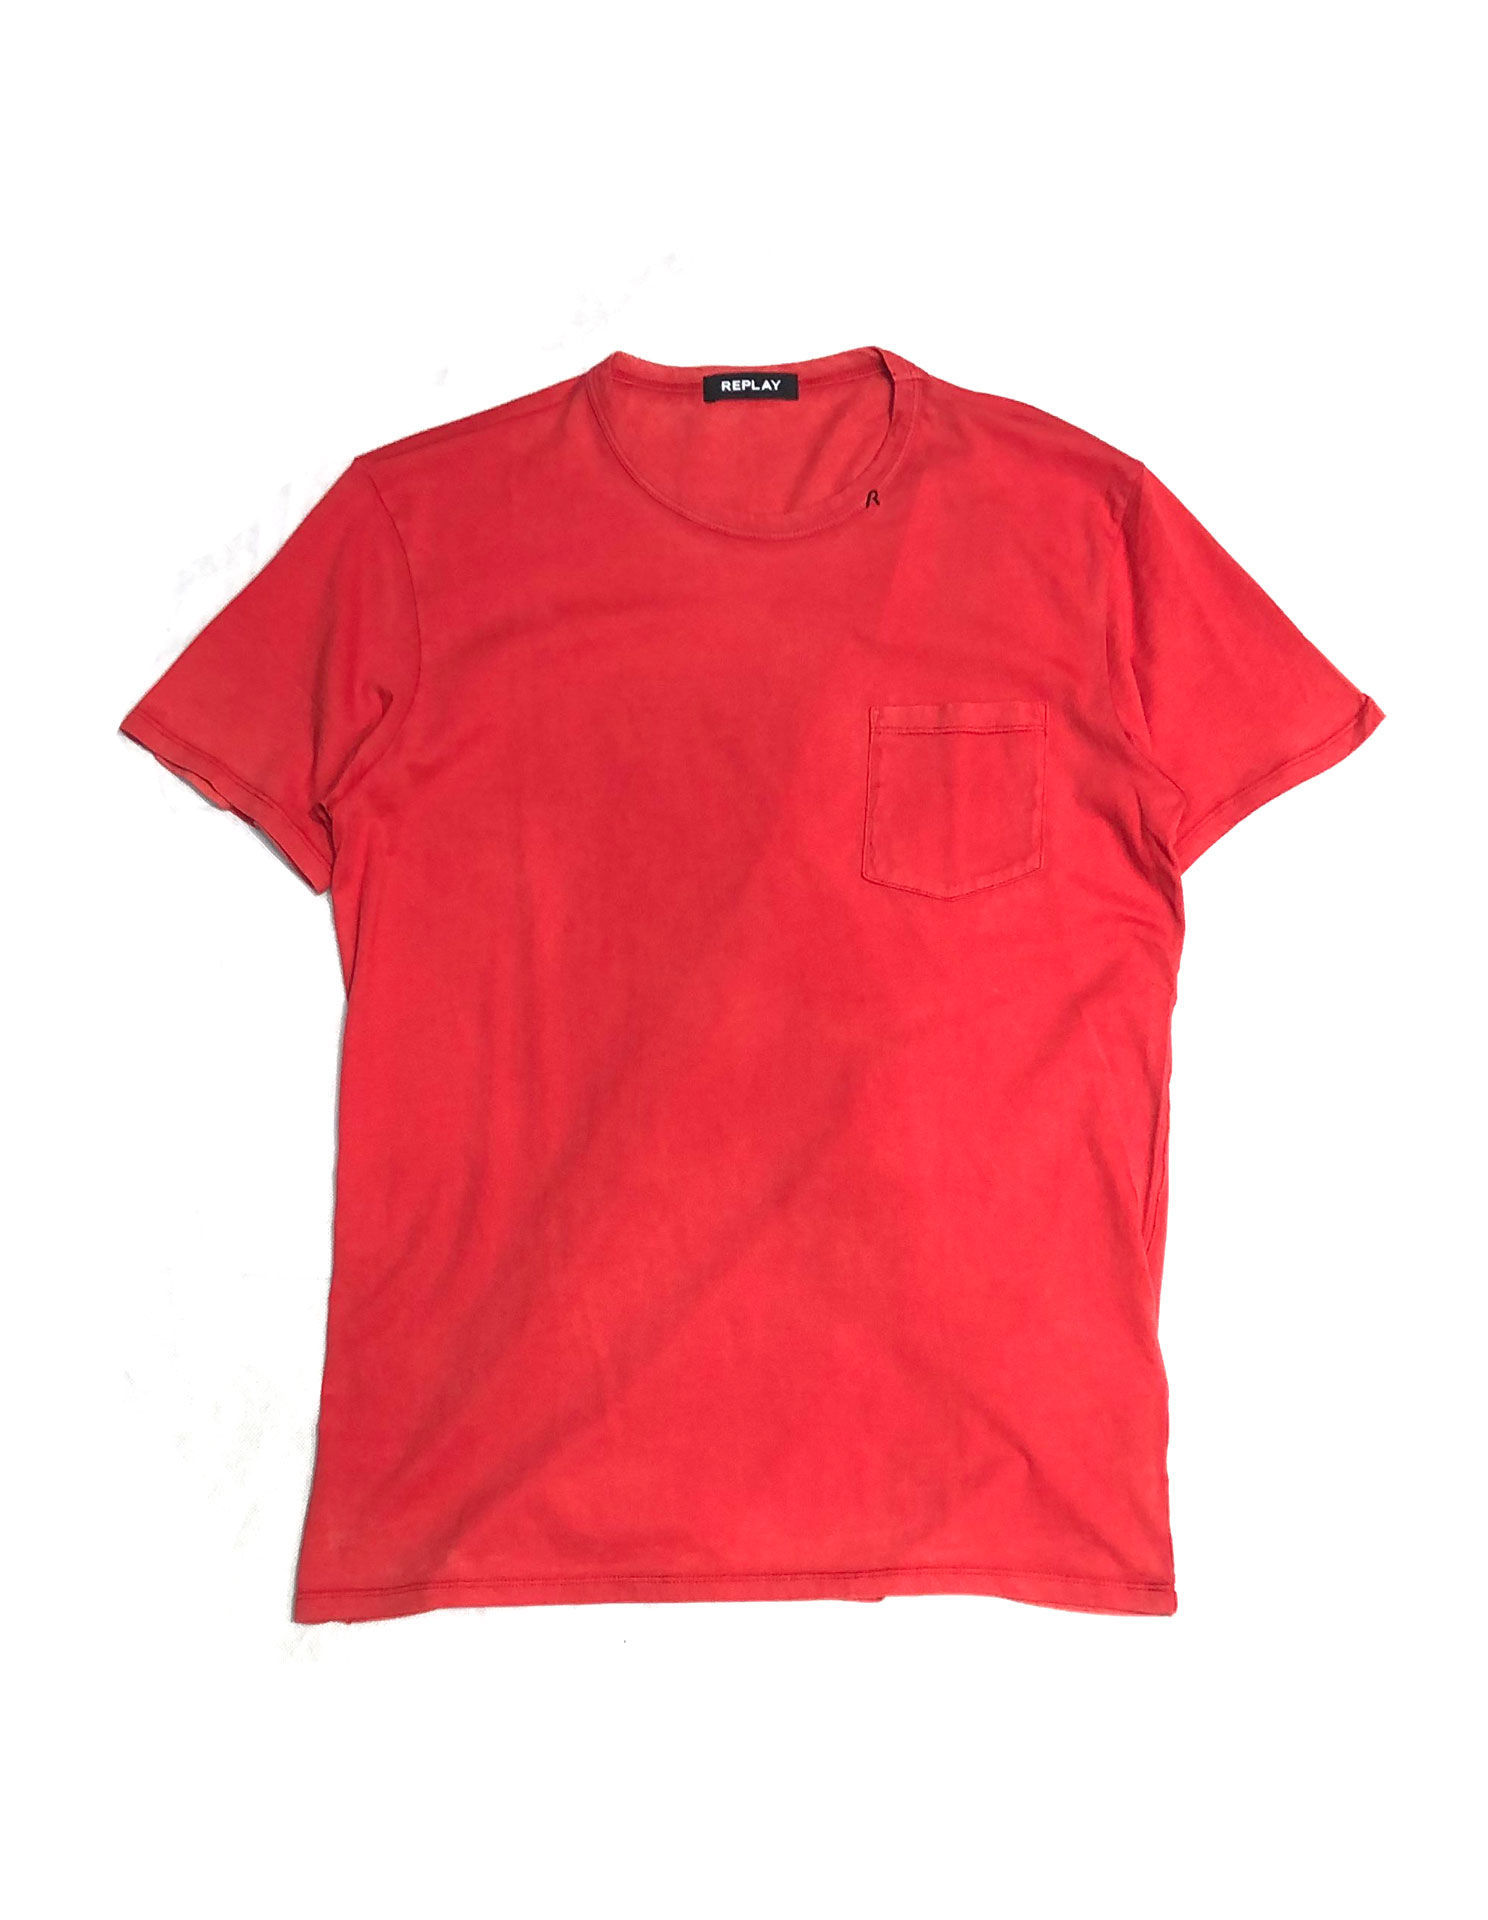 Replay Red Washed Pocket Tee - George Harrison | Designer Menswear in ...